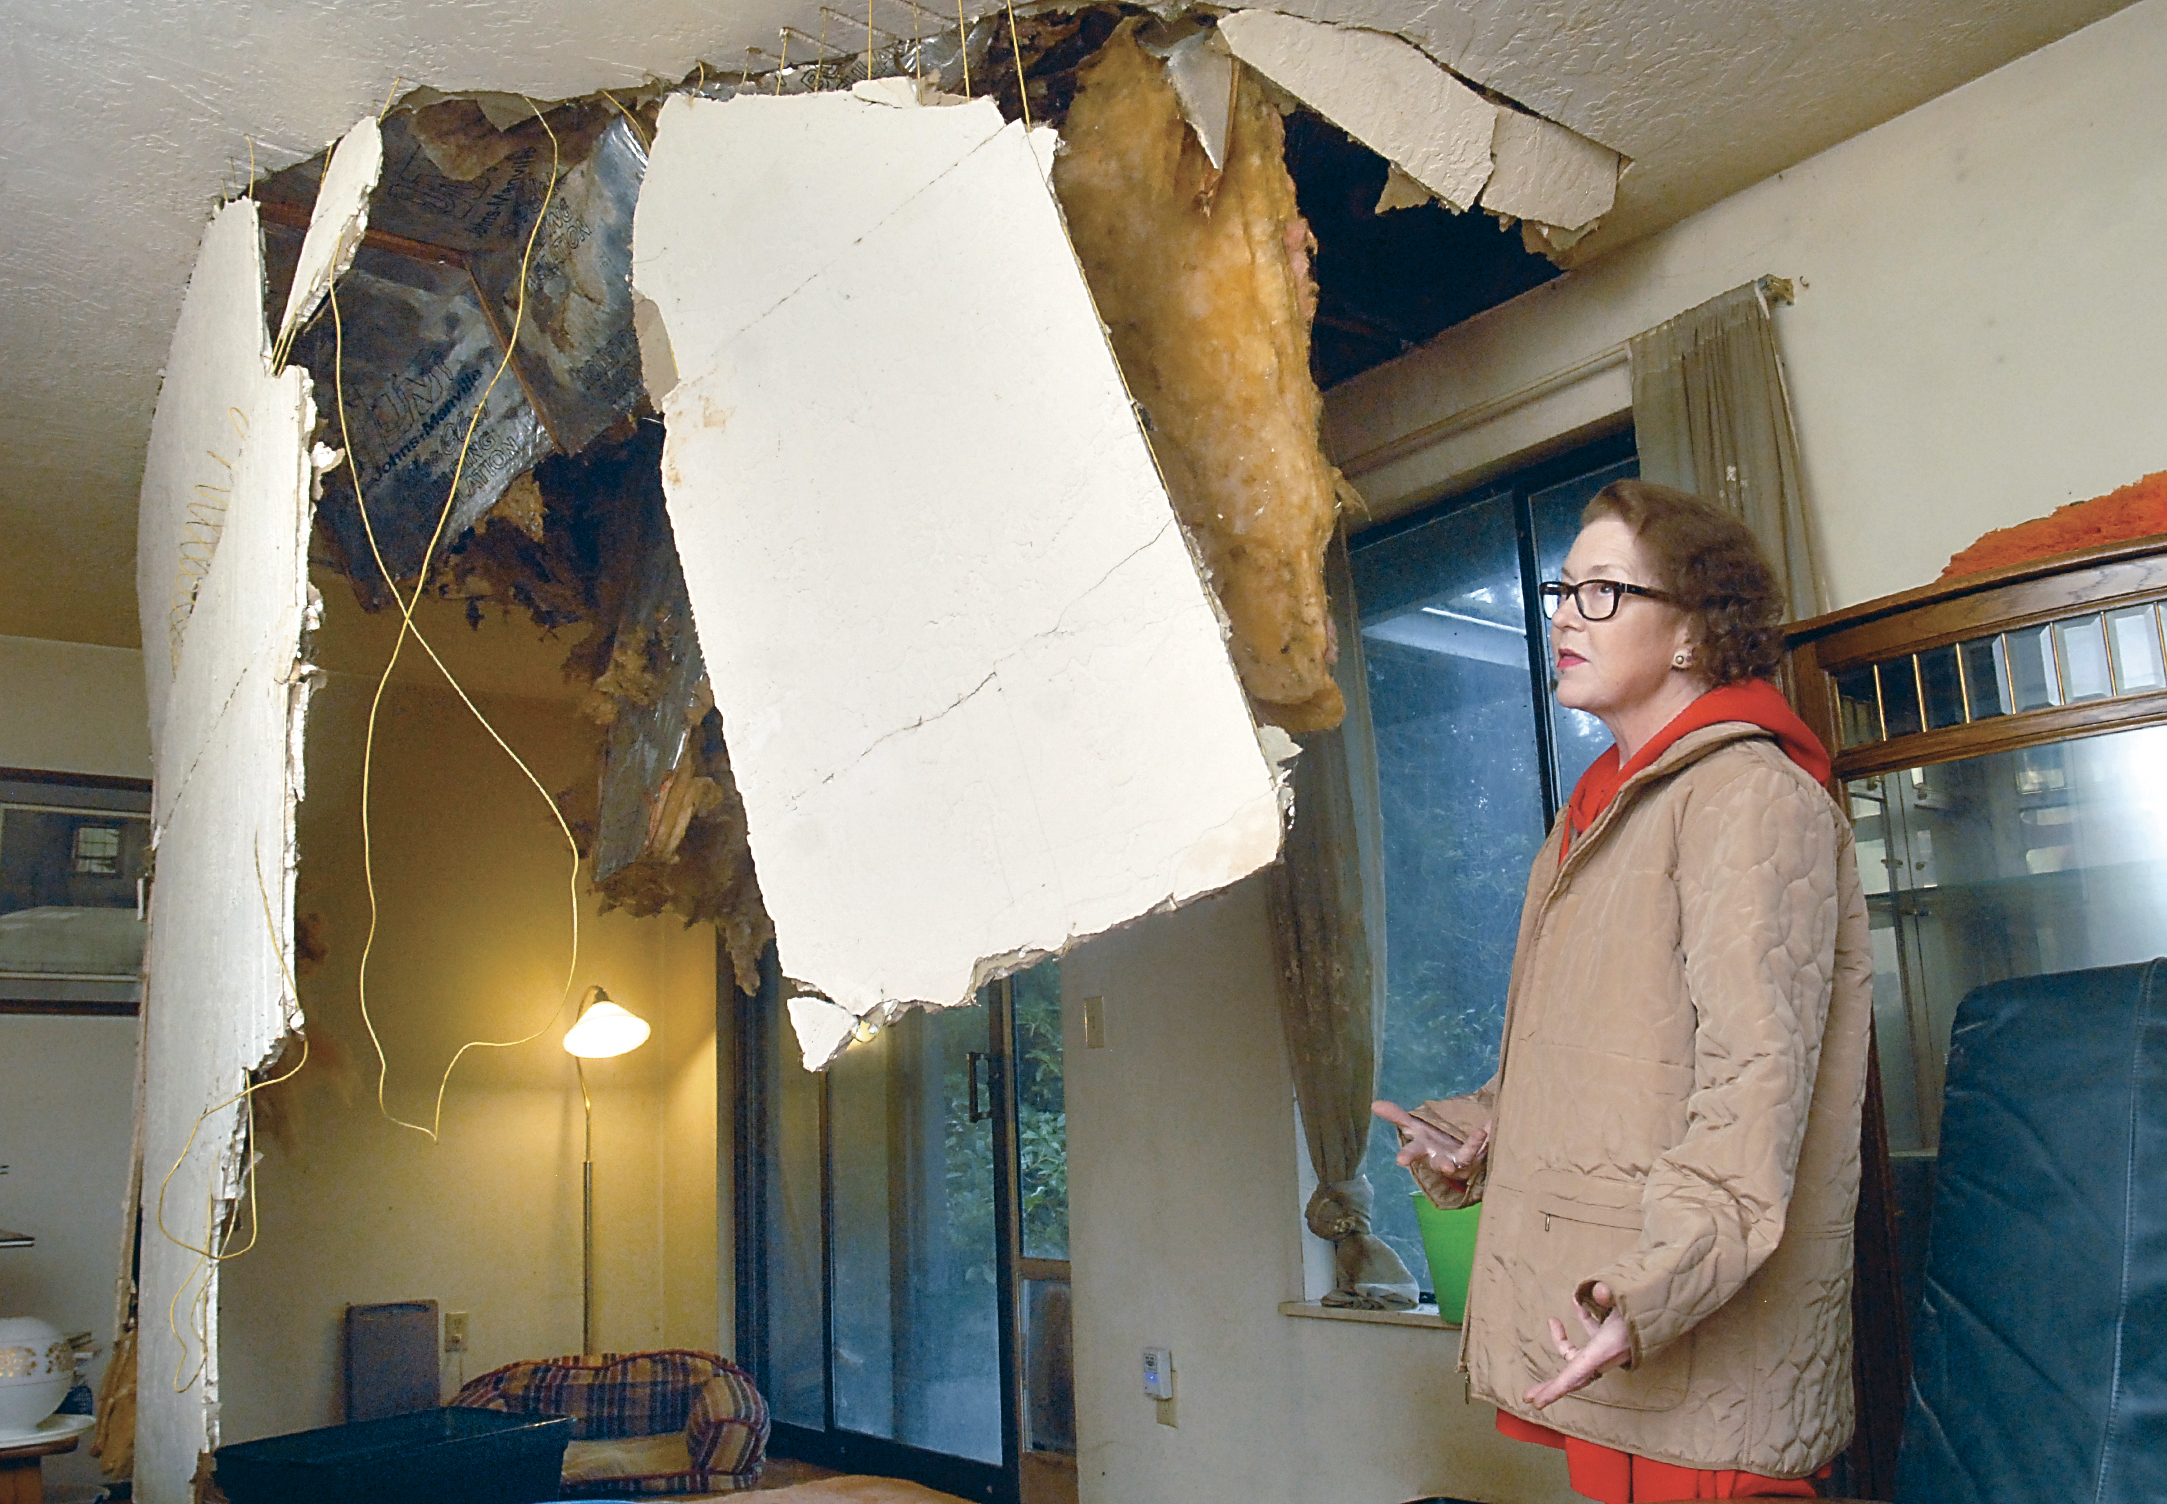 LeeAnn Daniels talks about the collapsed ceiling and the rat-infested attic of her home in rural Sequim. Keith Thorpe/Peninsula Daily News